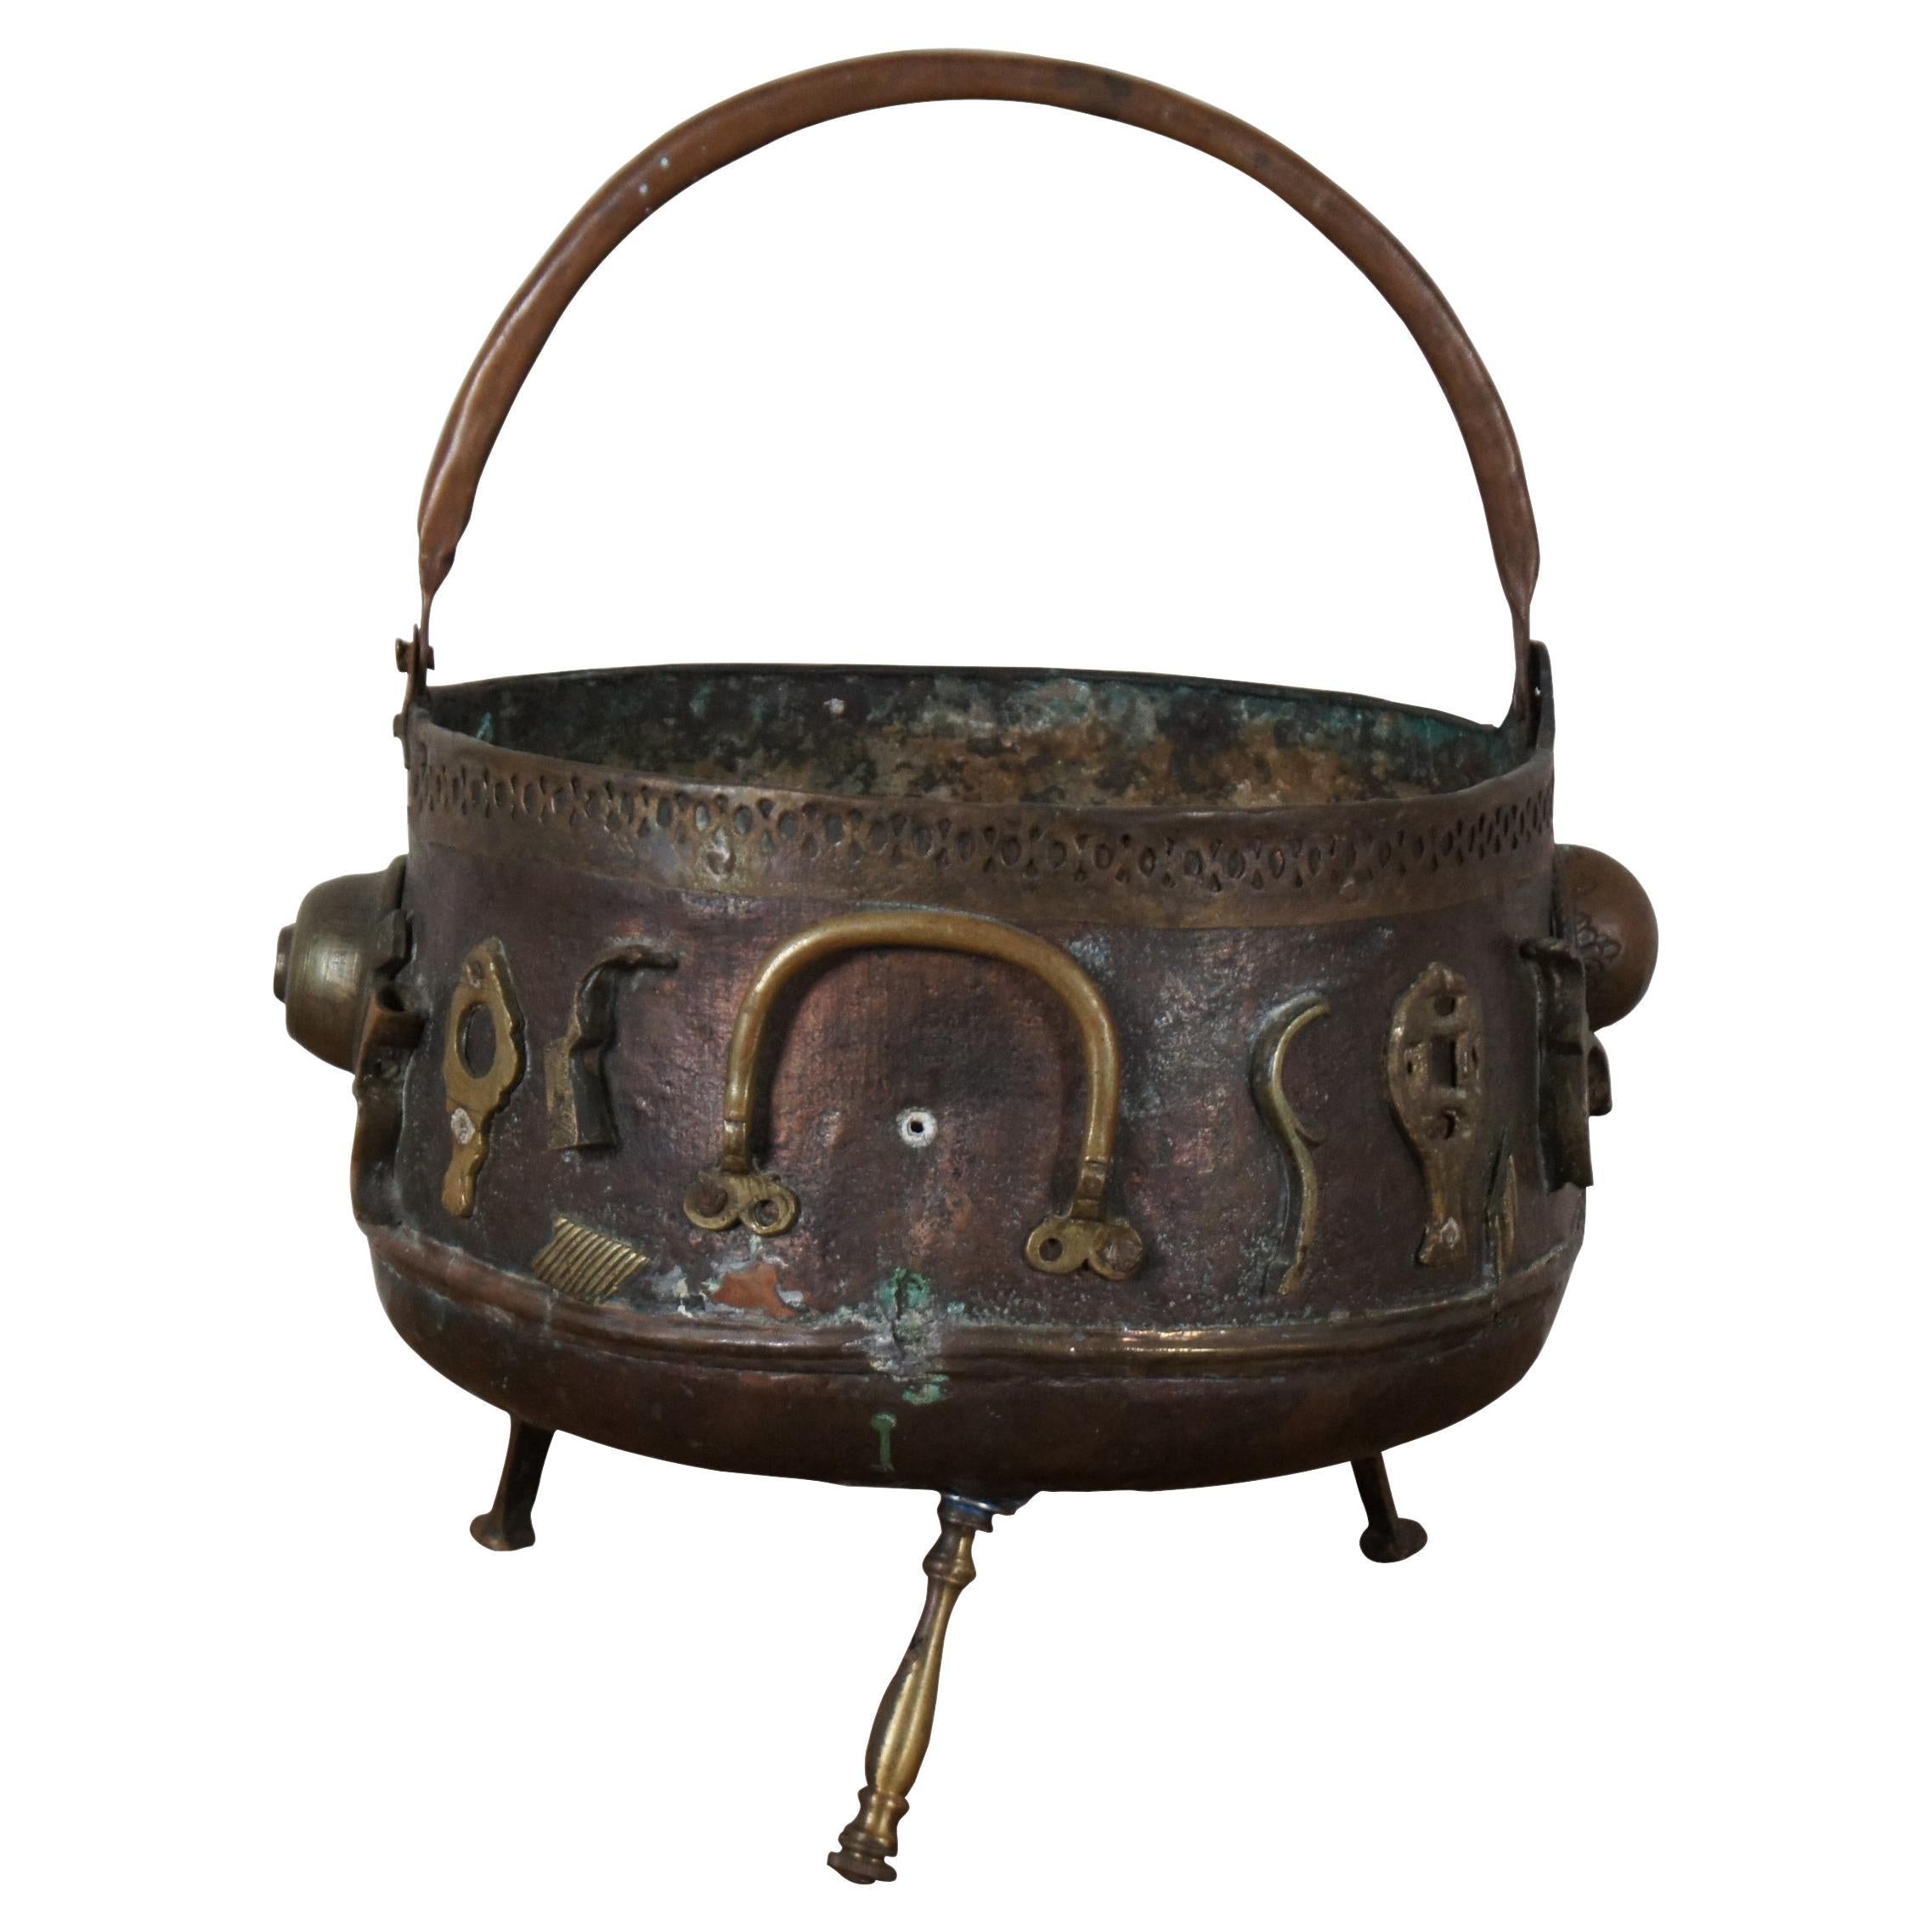 Antique bronze cauldron with tripod base and swivel handle, decorated with etched ornate medallions going along the body. Circa 19th century.

Provenance : Jerome Schottenstein Estate, Columbus Ohio. Jerome was was an American entrepreneur and